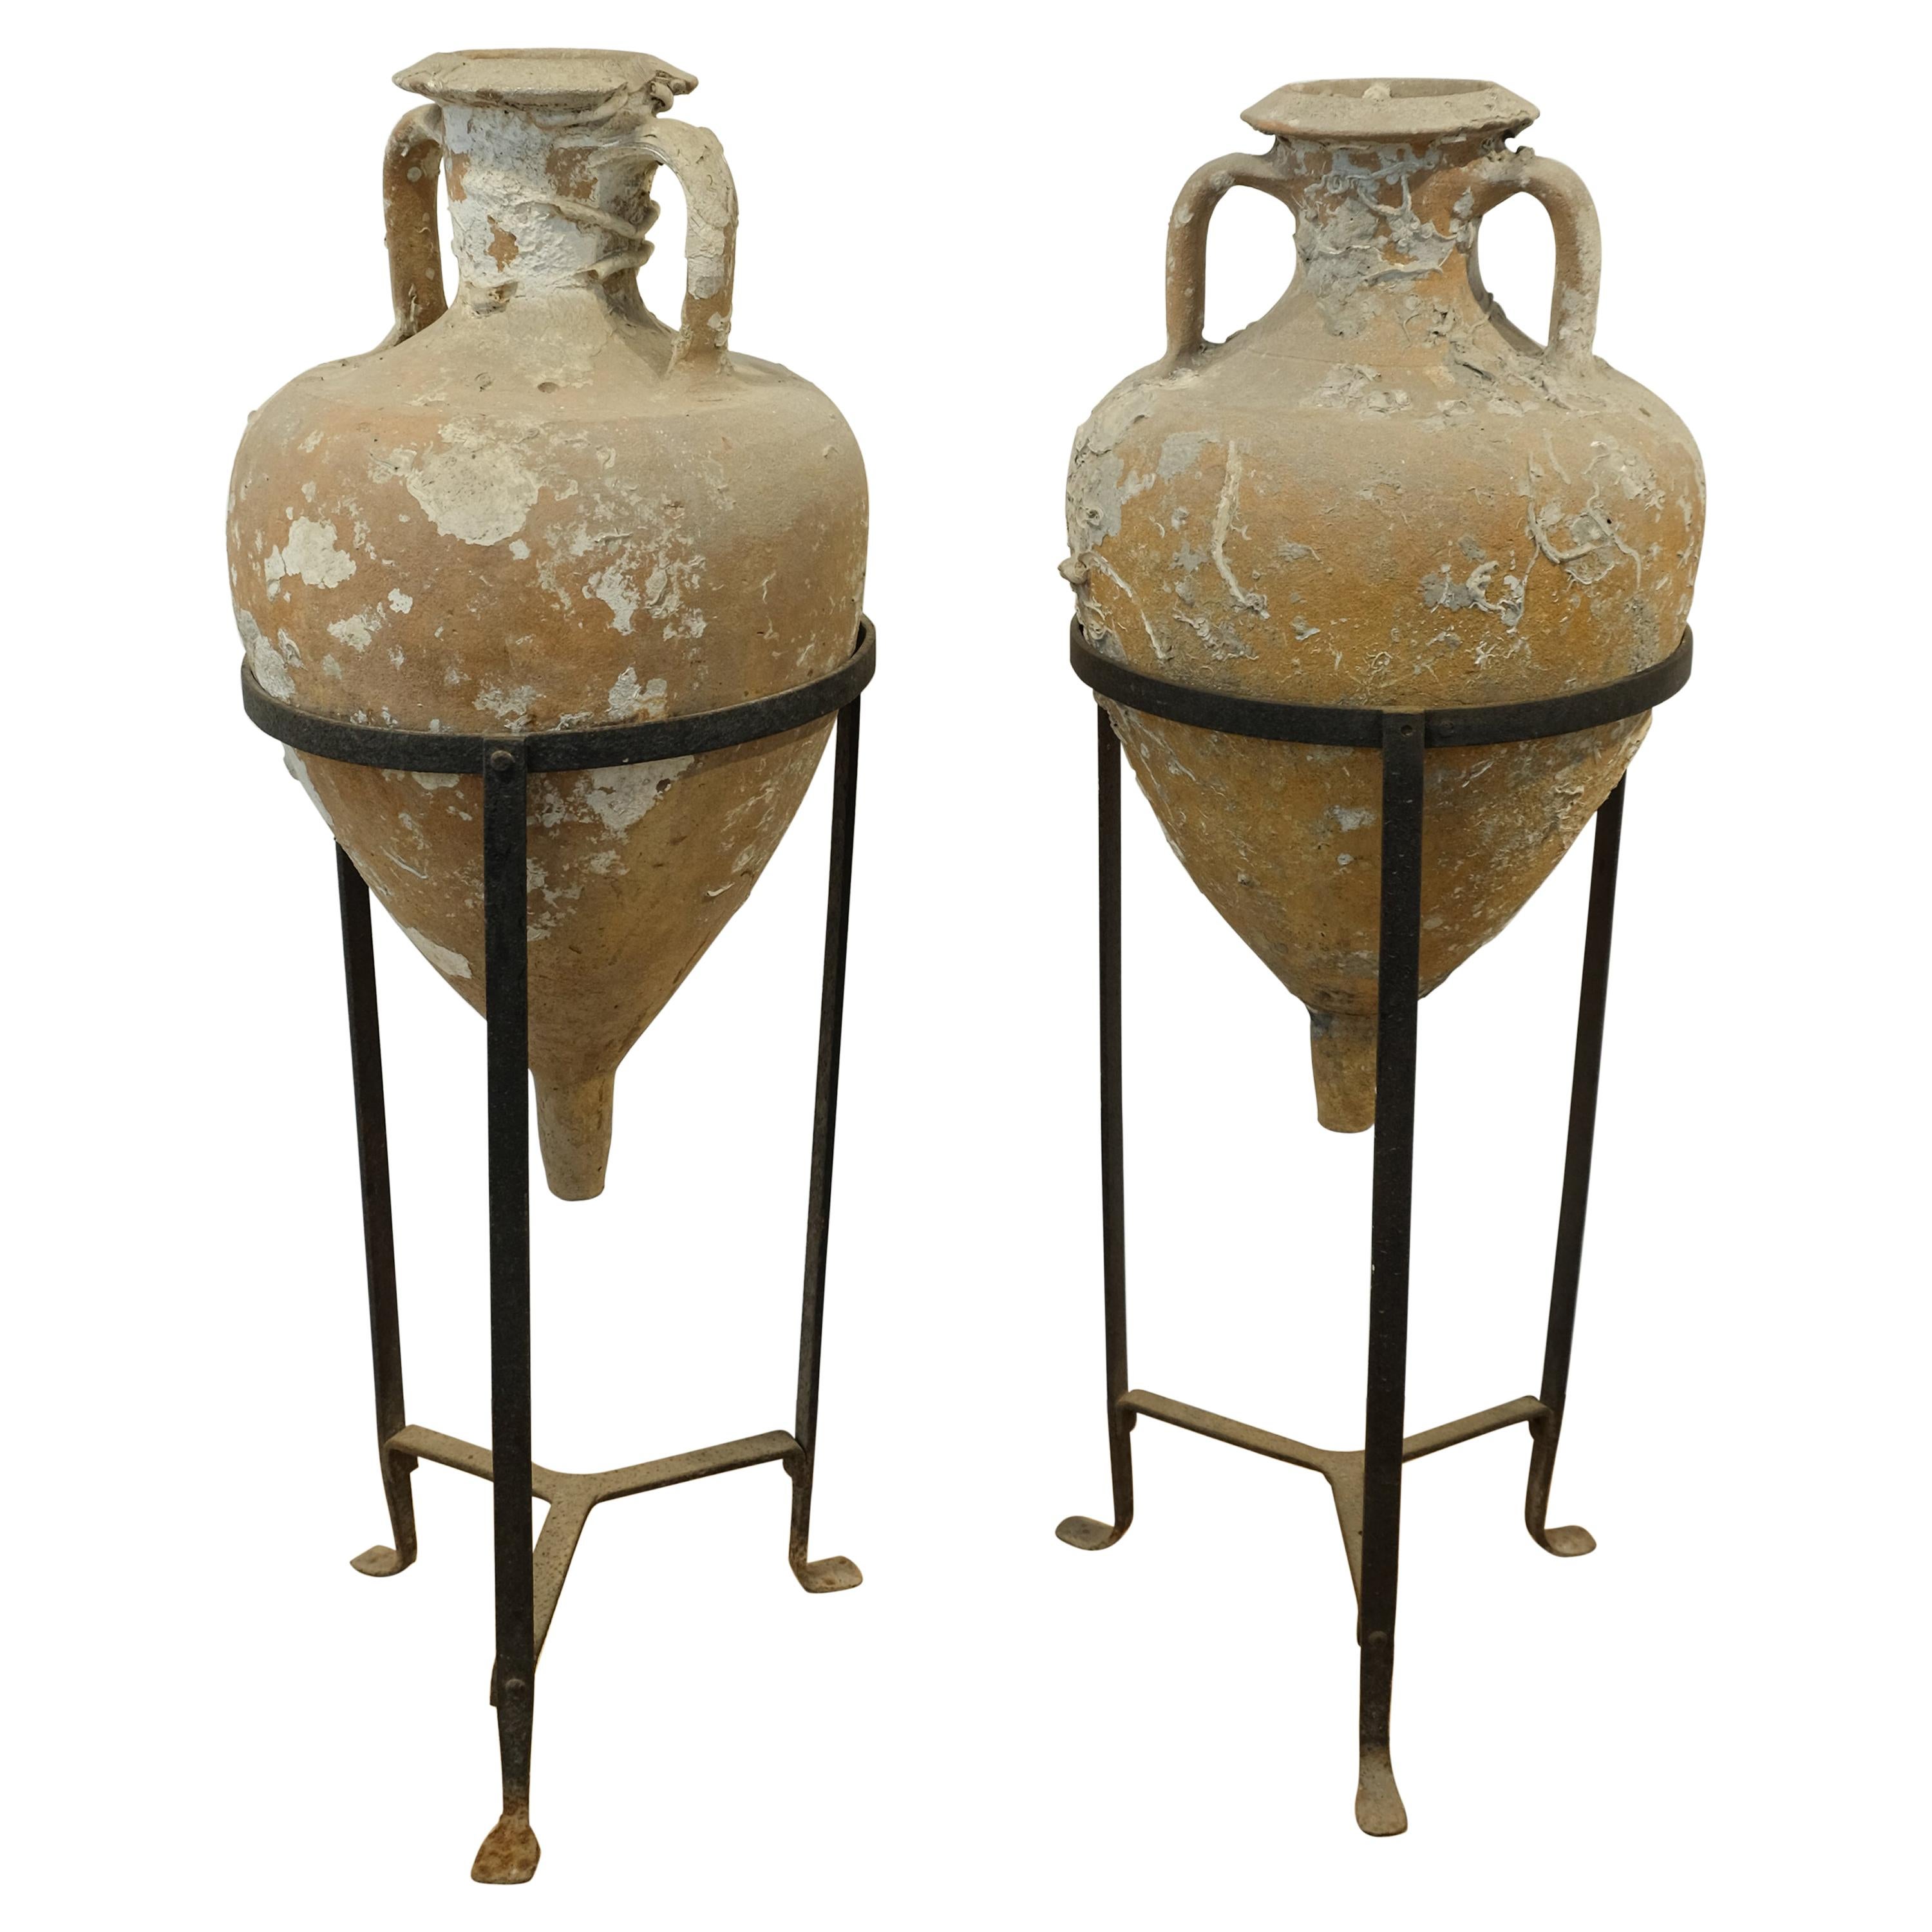 Pair of Sea Salvaged Roman Amphorae with 19th Century Wrought Iron Stands